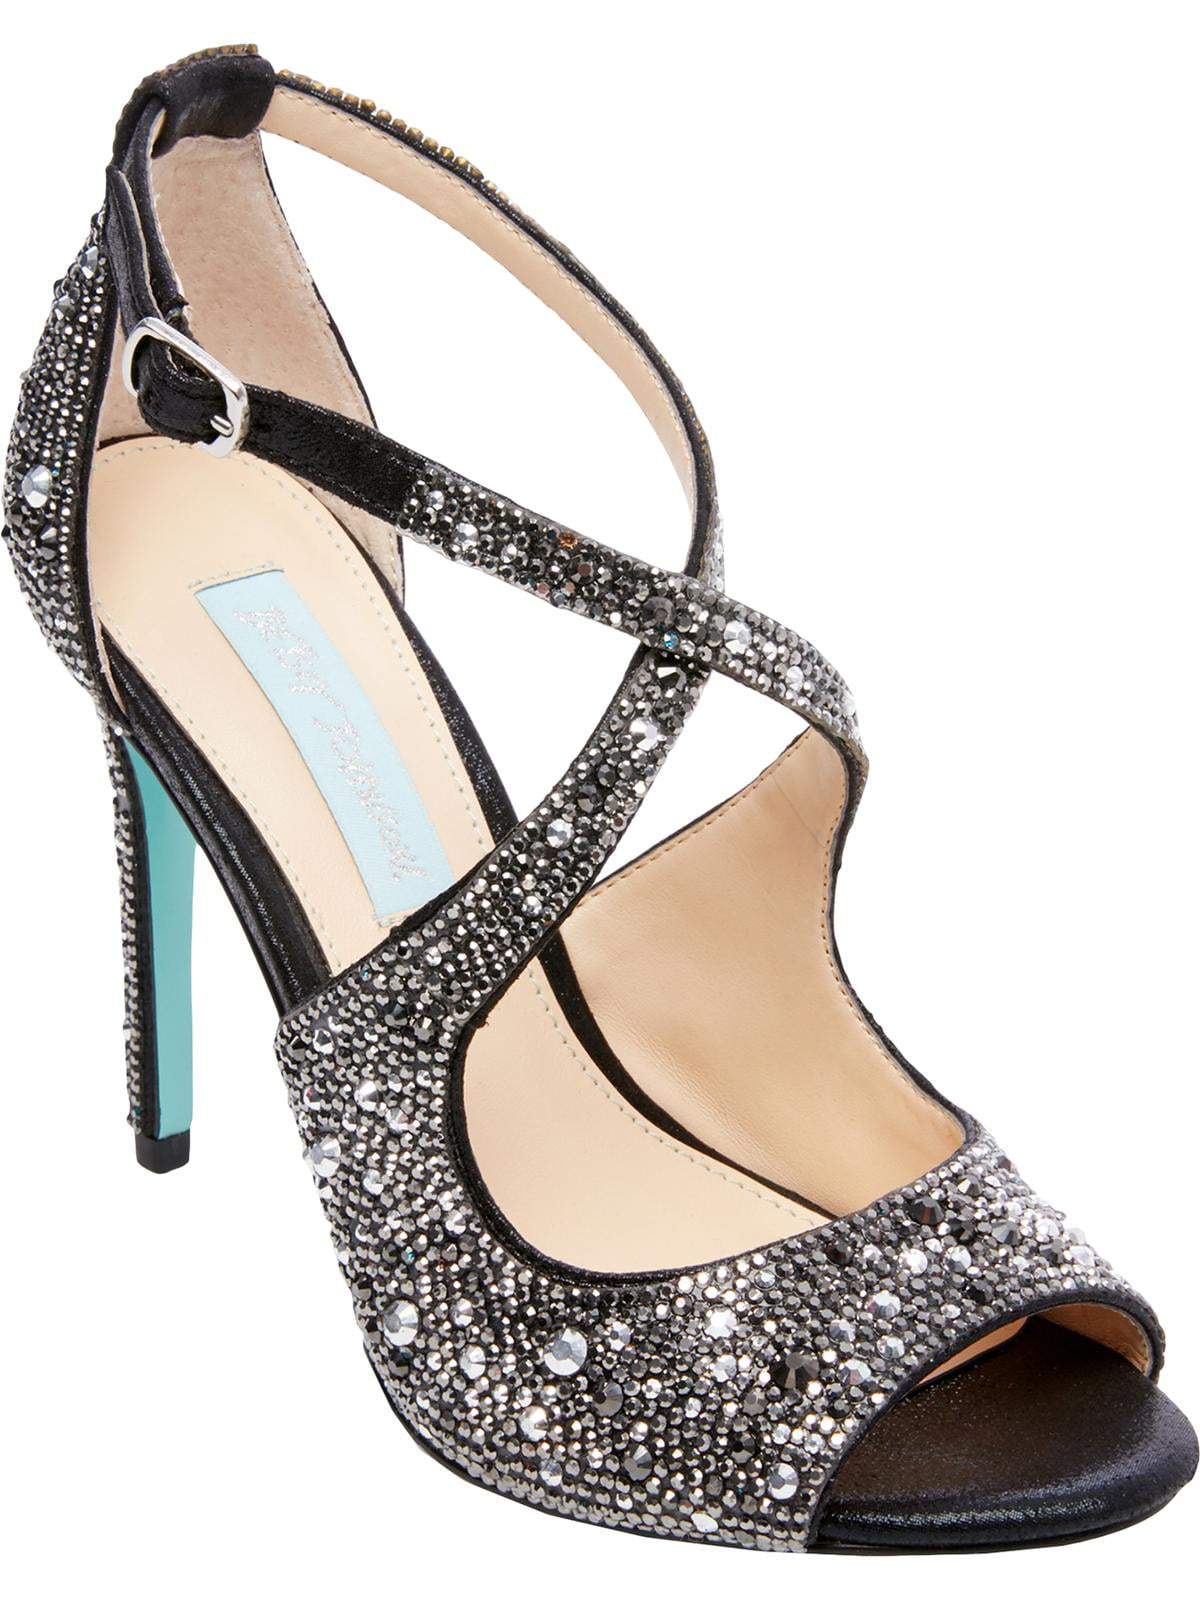 Details about   Hot Womens Mixed Colors Rhinestones Ankle Strap Med Heels Sandals Shoes Fashion 